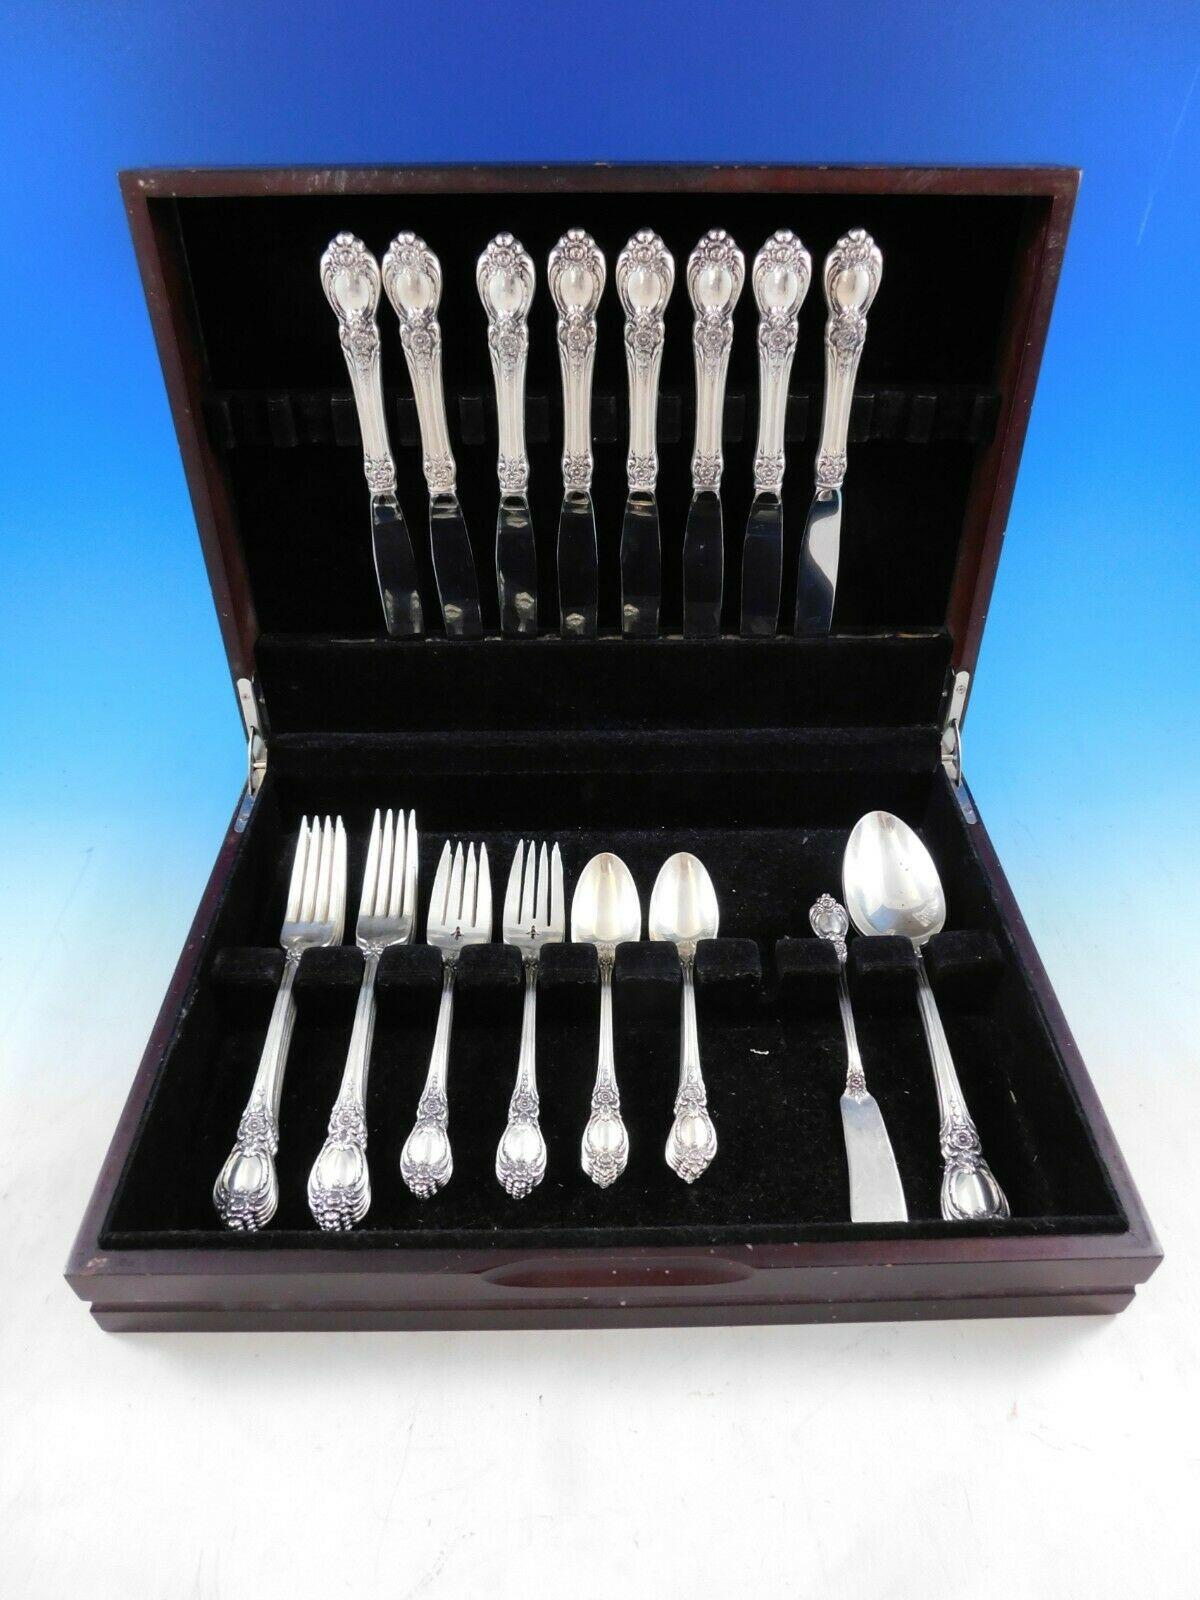 Dinner size Stanton hall by Oneida Sterling silver flatware set, 35 pieces. This set includes:

8 dinner size knives, 9 1/2